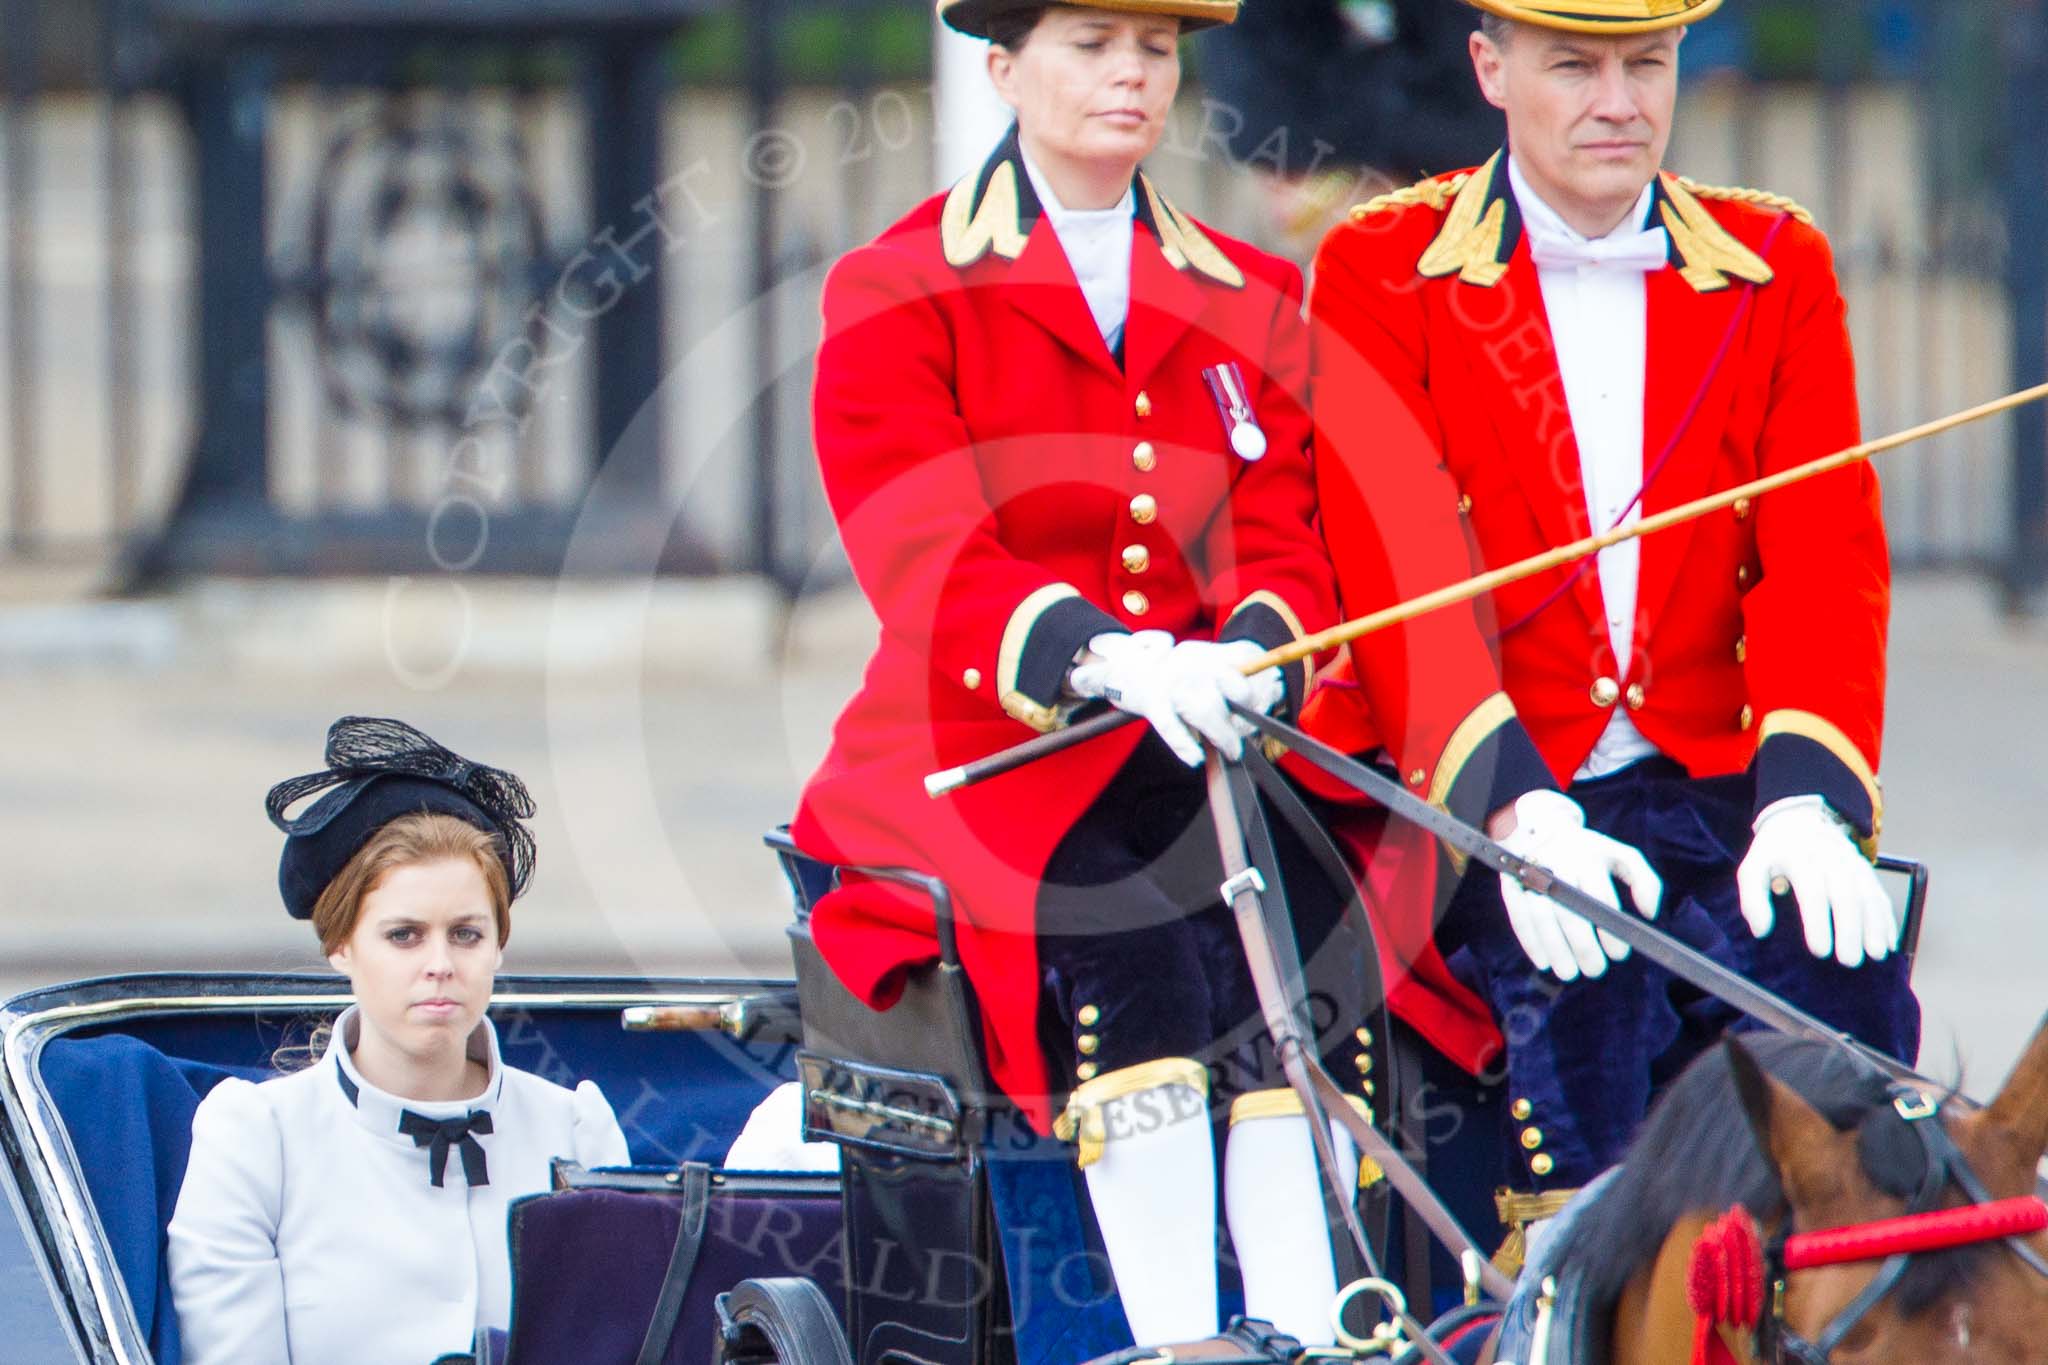 Trooping the Colour 2013: HRH Princess Beatrice of York in the second barouche carriage on the way across Horse Guards Parade to watch the parade from the Major General's office. Image #198, 15 June 2013 10:50 Horse Guards Parade, London, UK